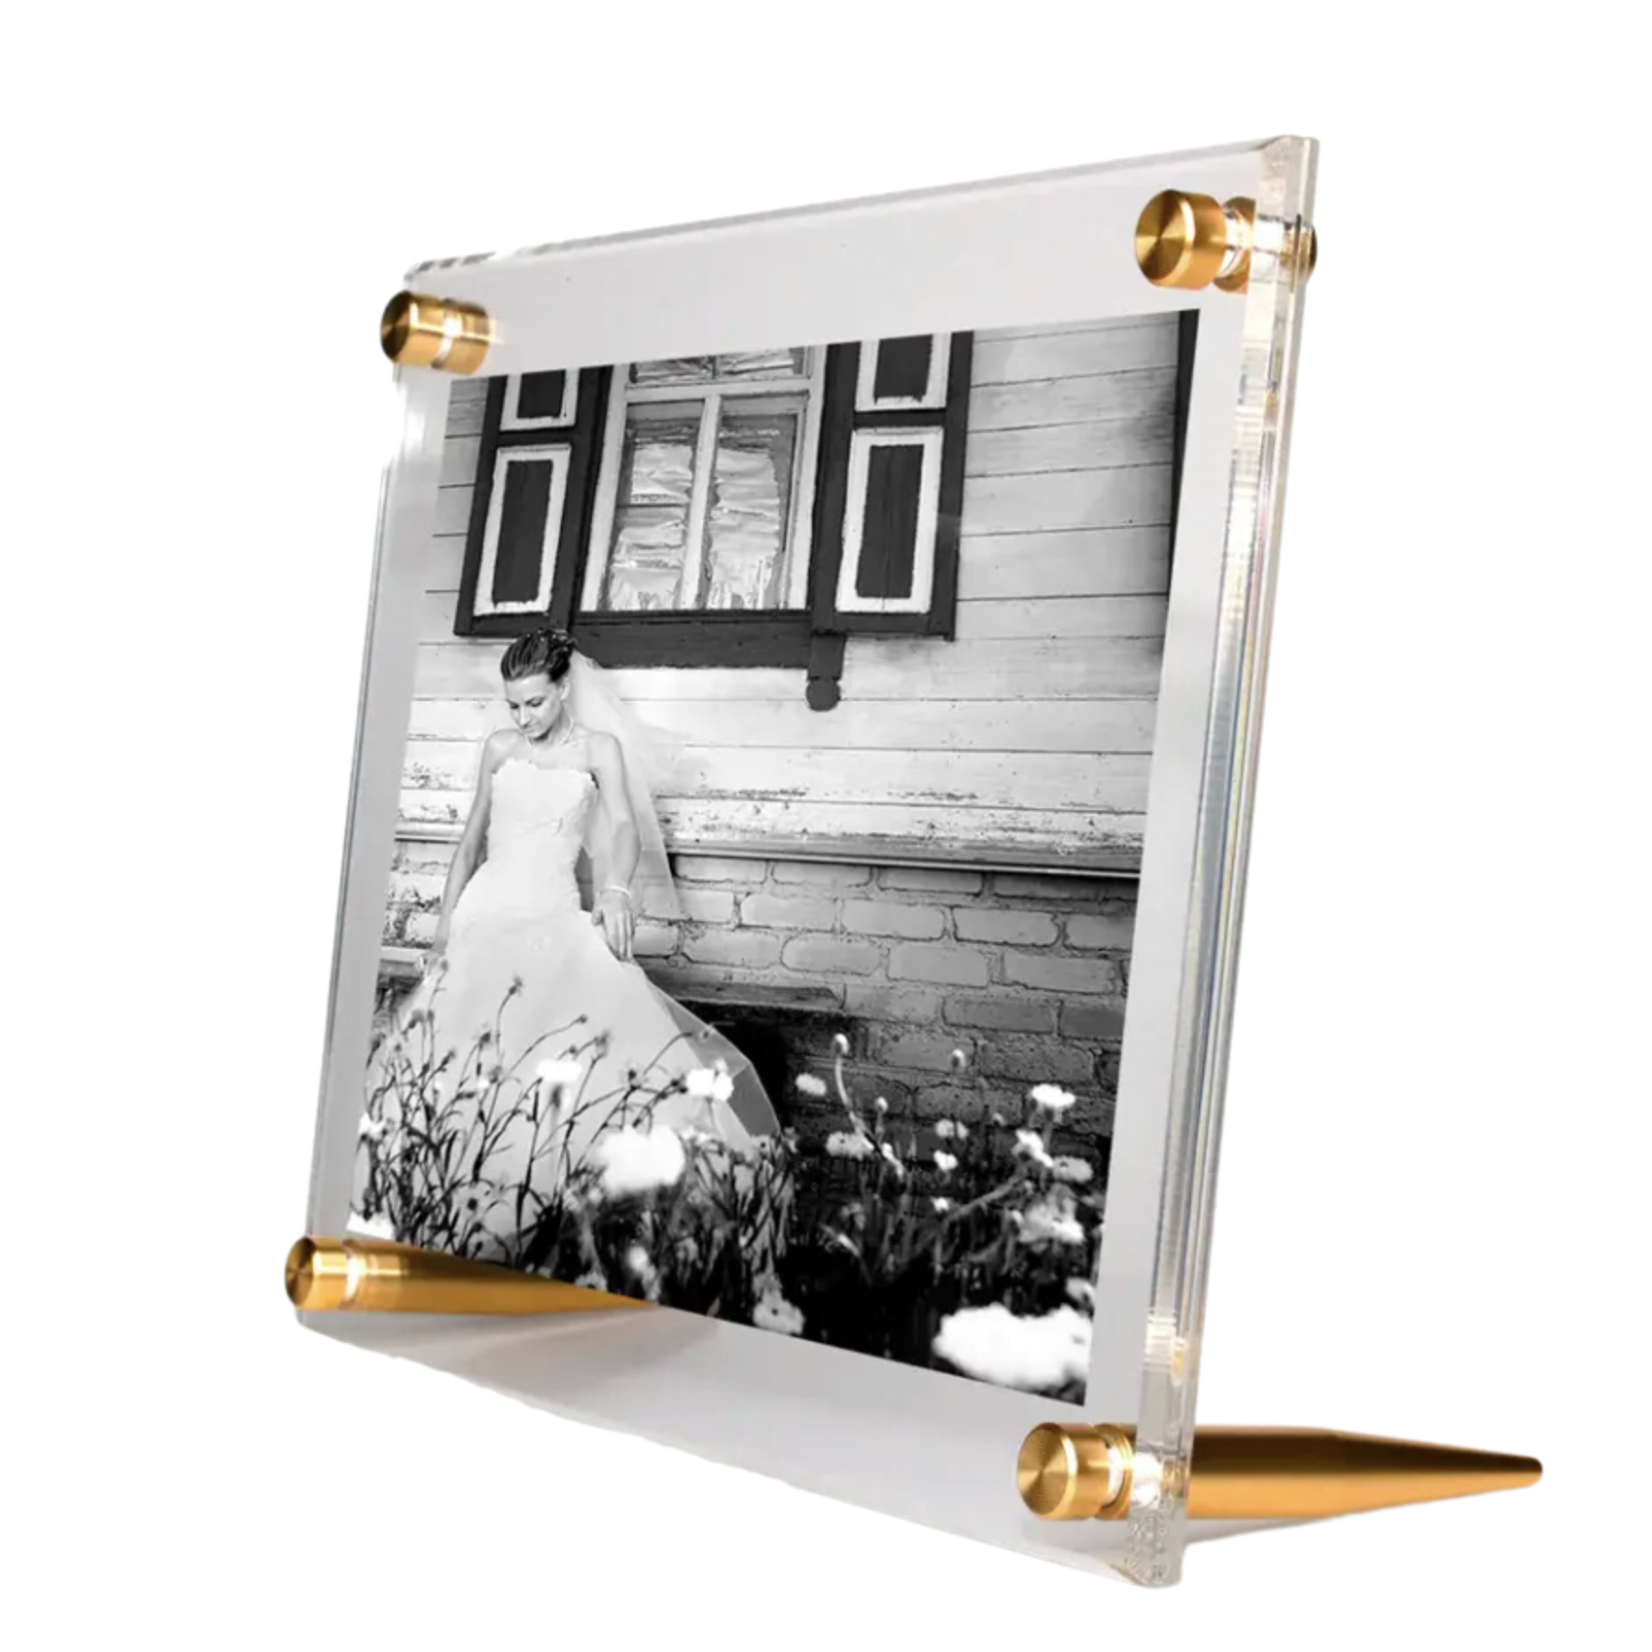 WEXEL ART 5" x 7" TABLE TOP PHOTO FRAME